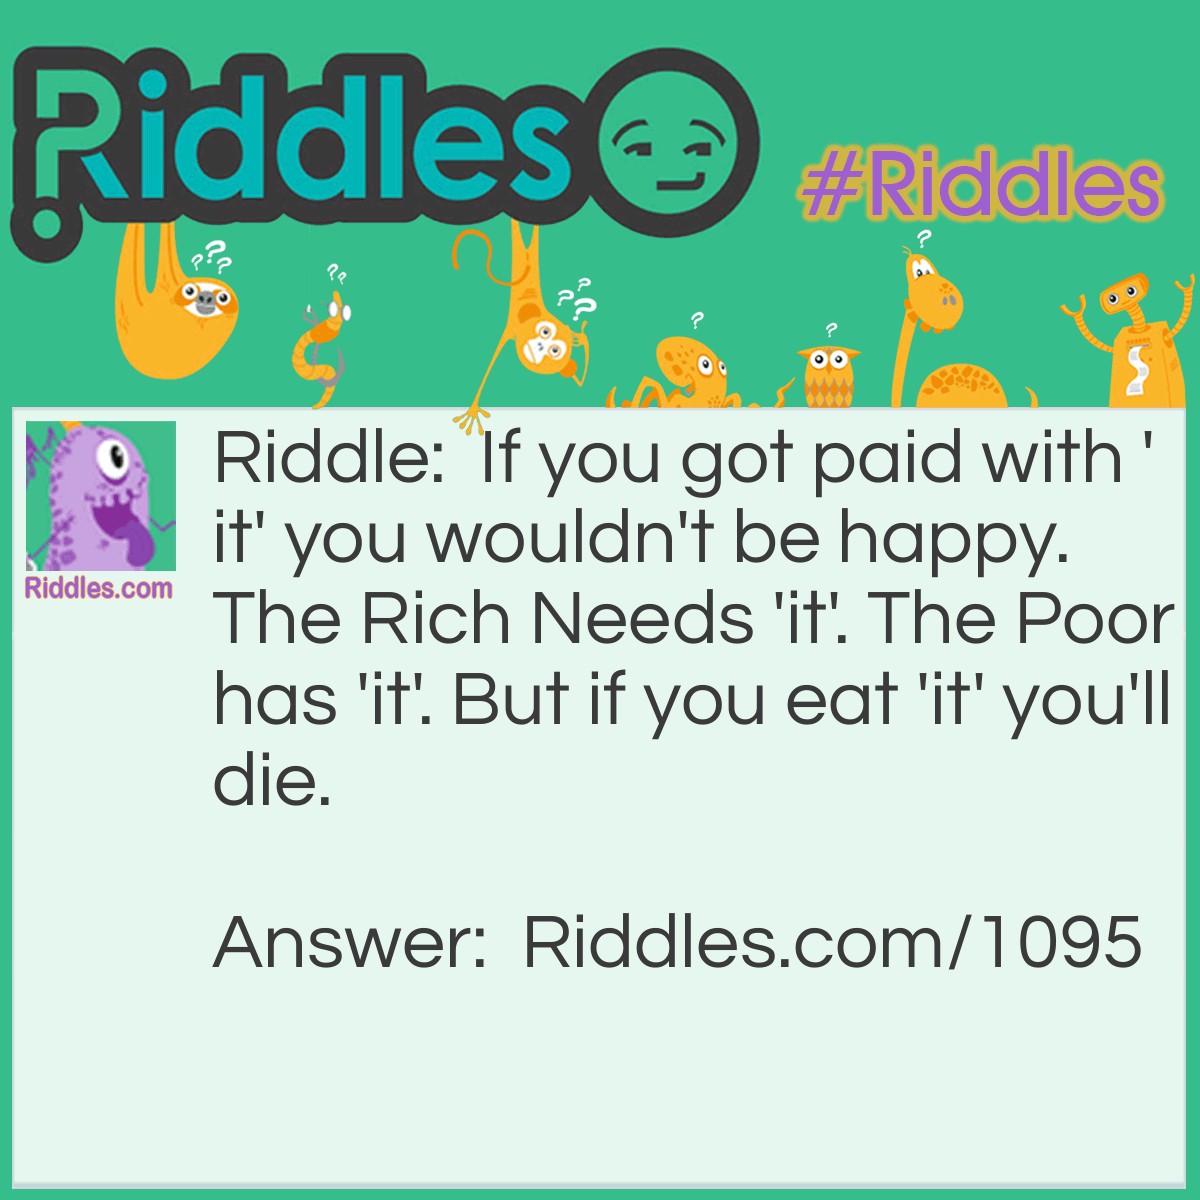 Riddle: If you got paid with 'it' you wouldn't be happy. The Rich Needs 'it'. The Poor has 'it'. But if you eat 'it' you'll die. What is it? Answer: Nothing.